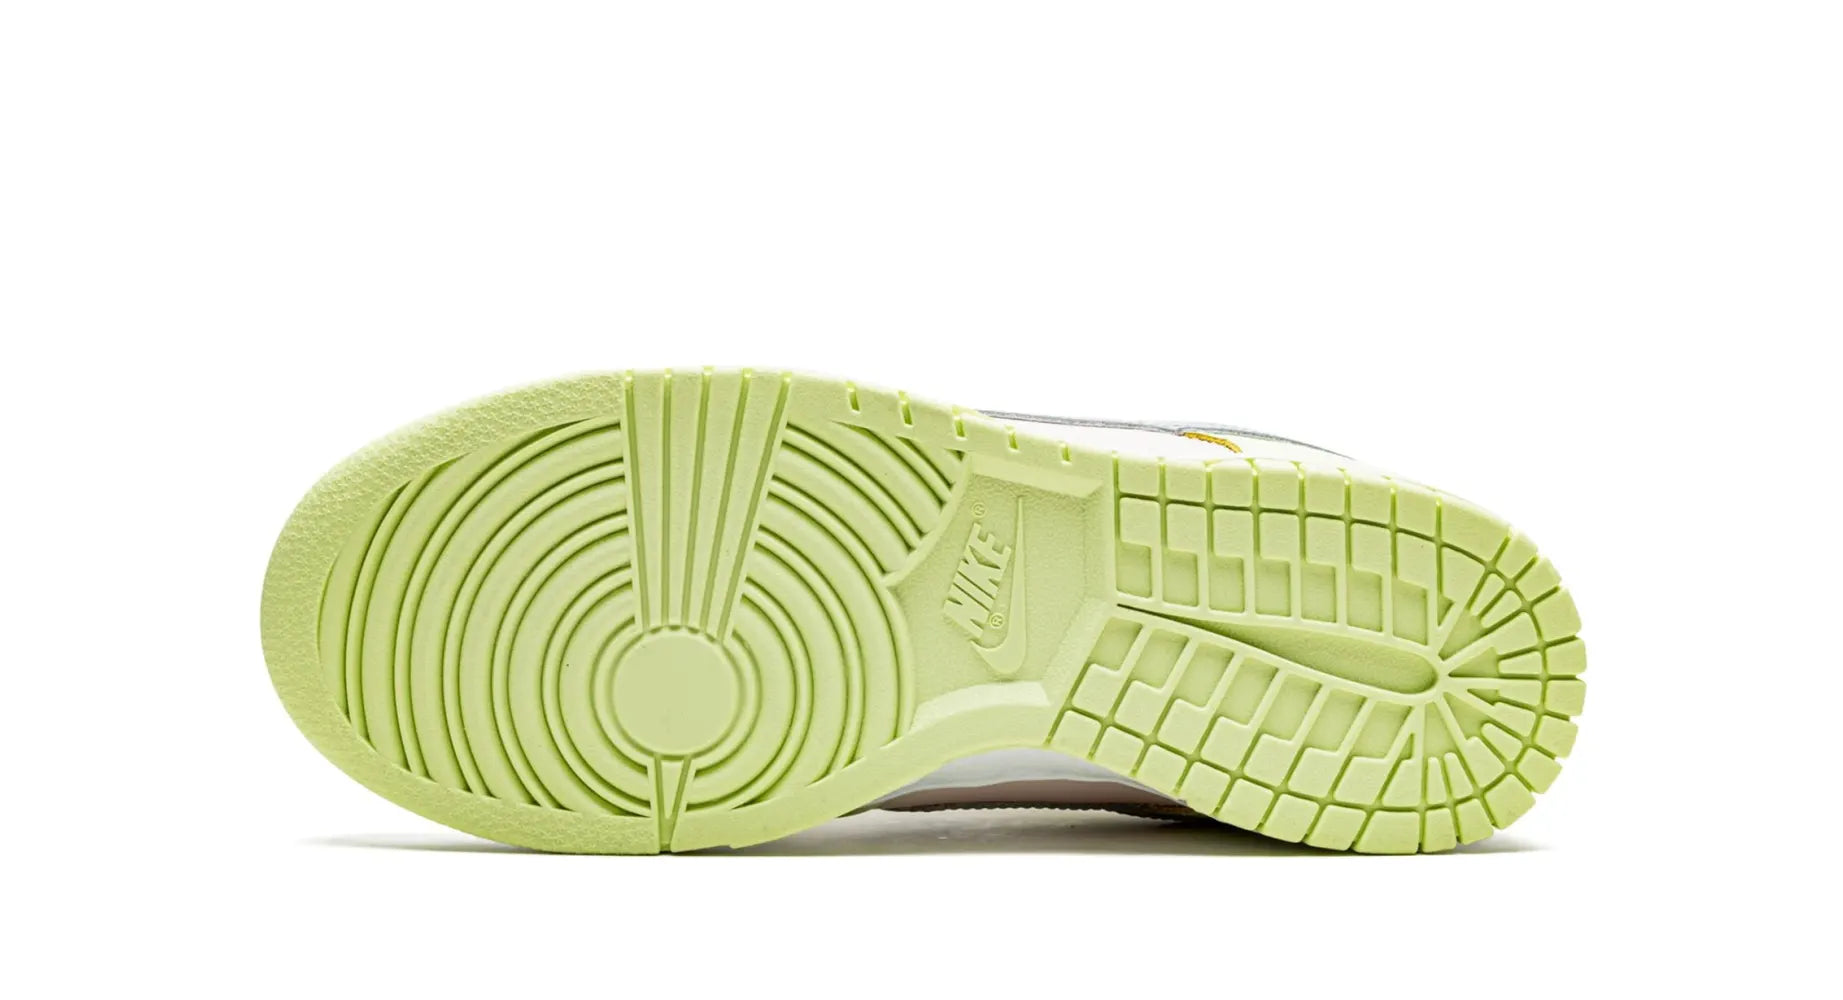 Nike Dunk Low Lime Ice (Women's)